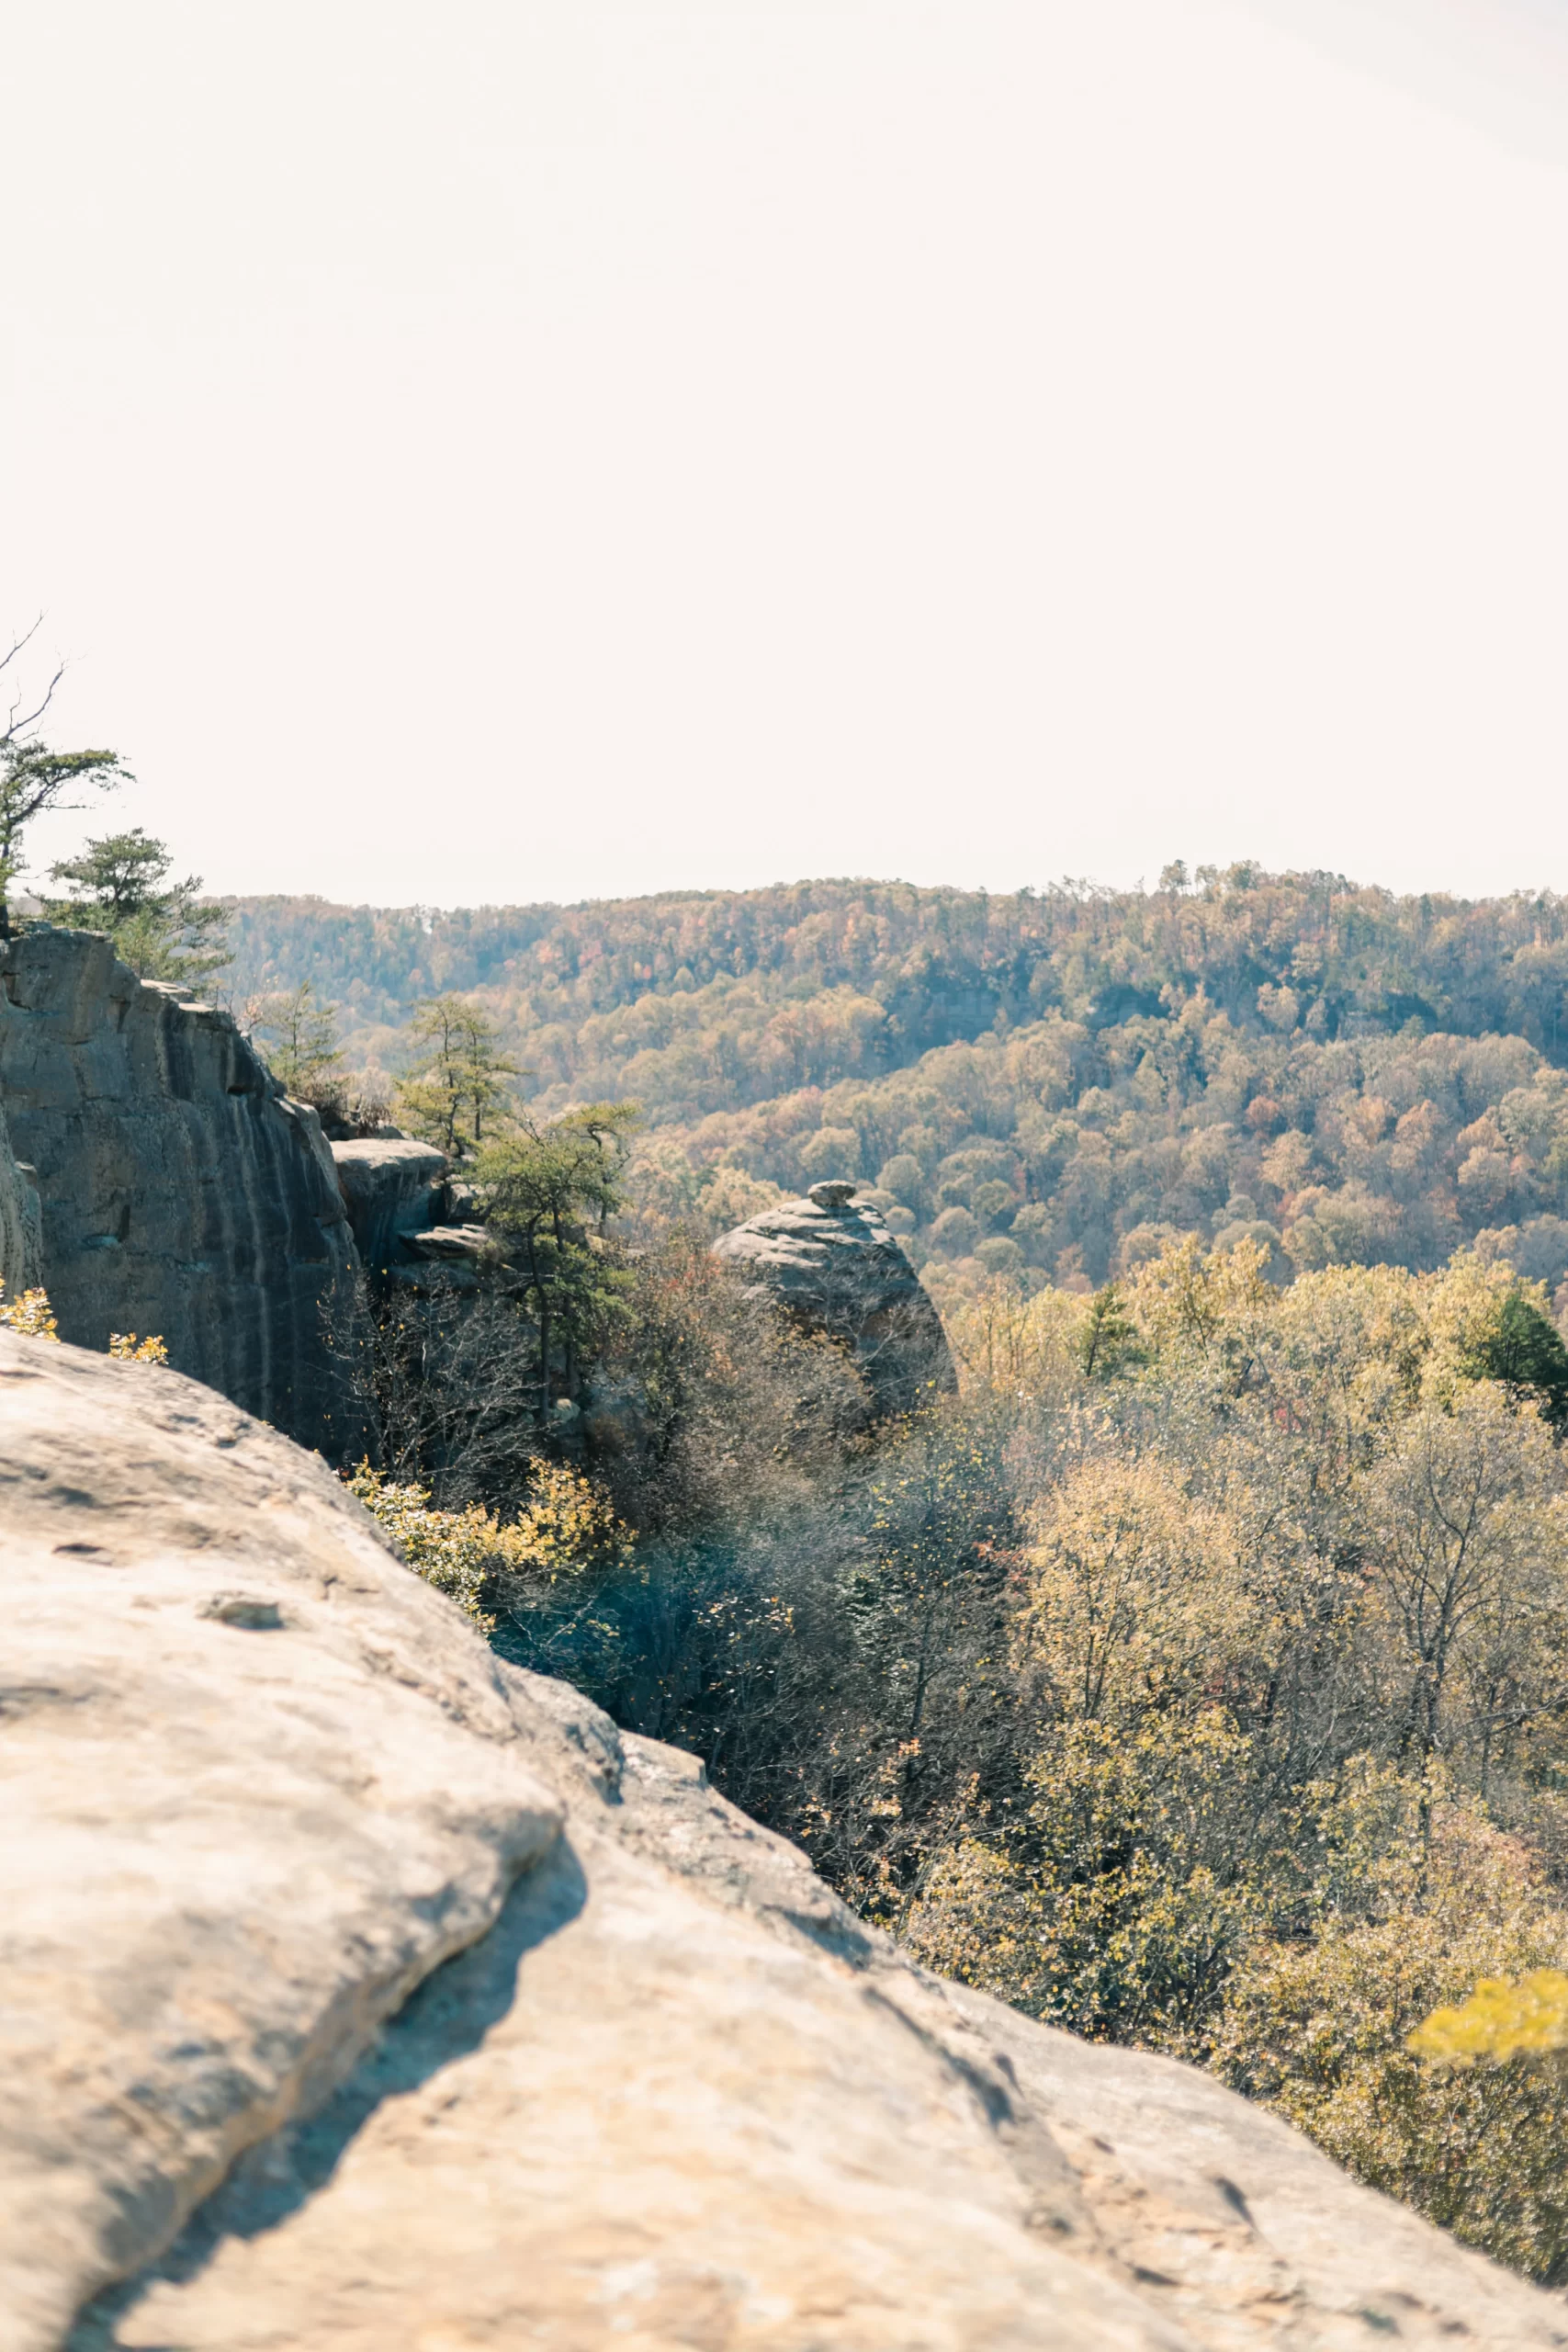 Red River Gorge, Kentucky, USA Published on January 29, 2021 Canon, EOS 6D Mark II Free to use under the Unsplash License